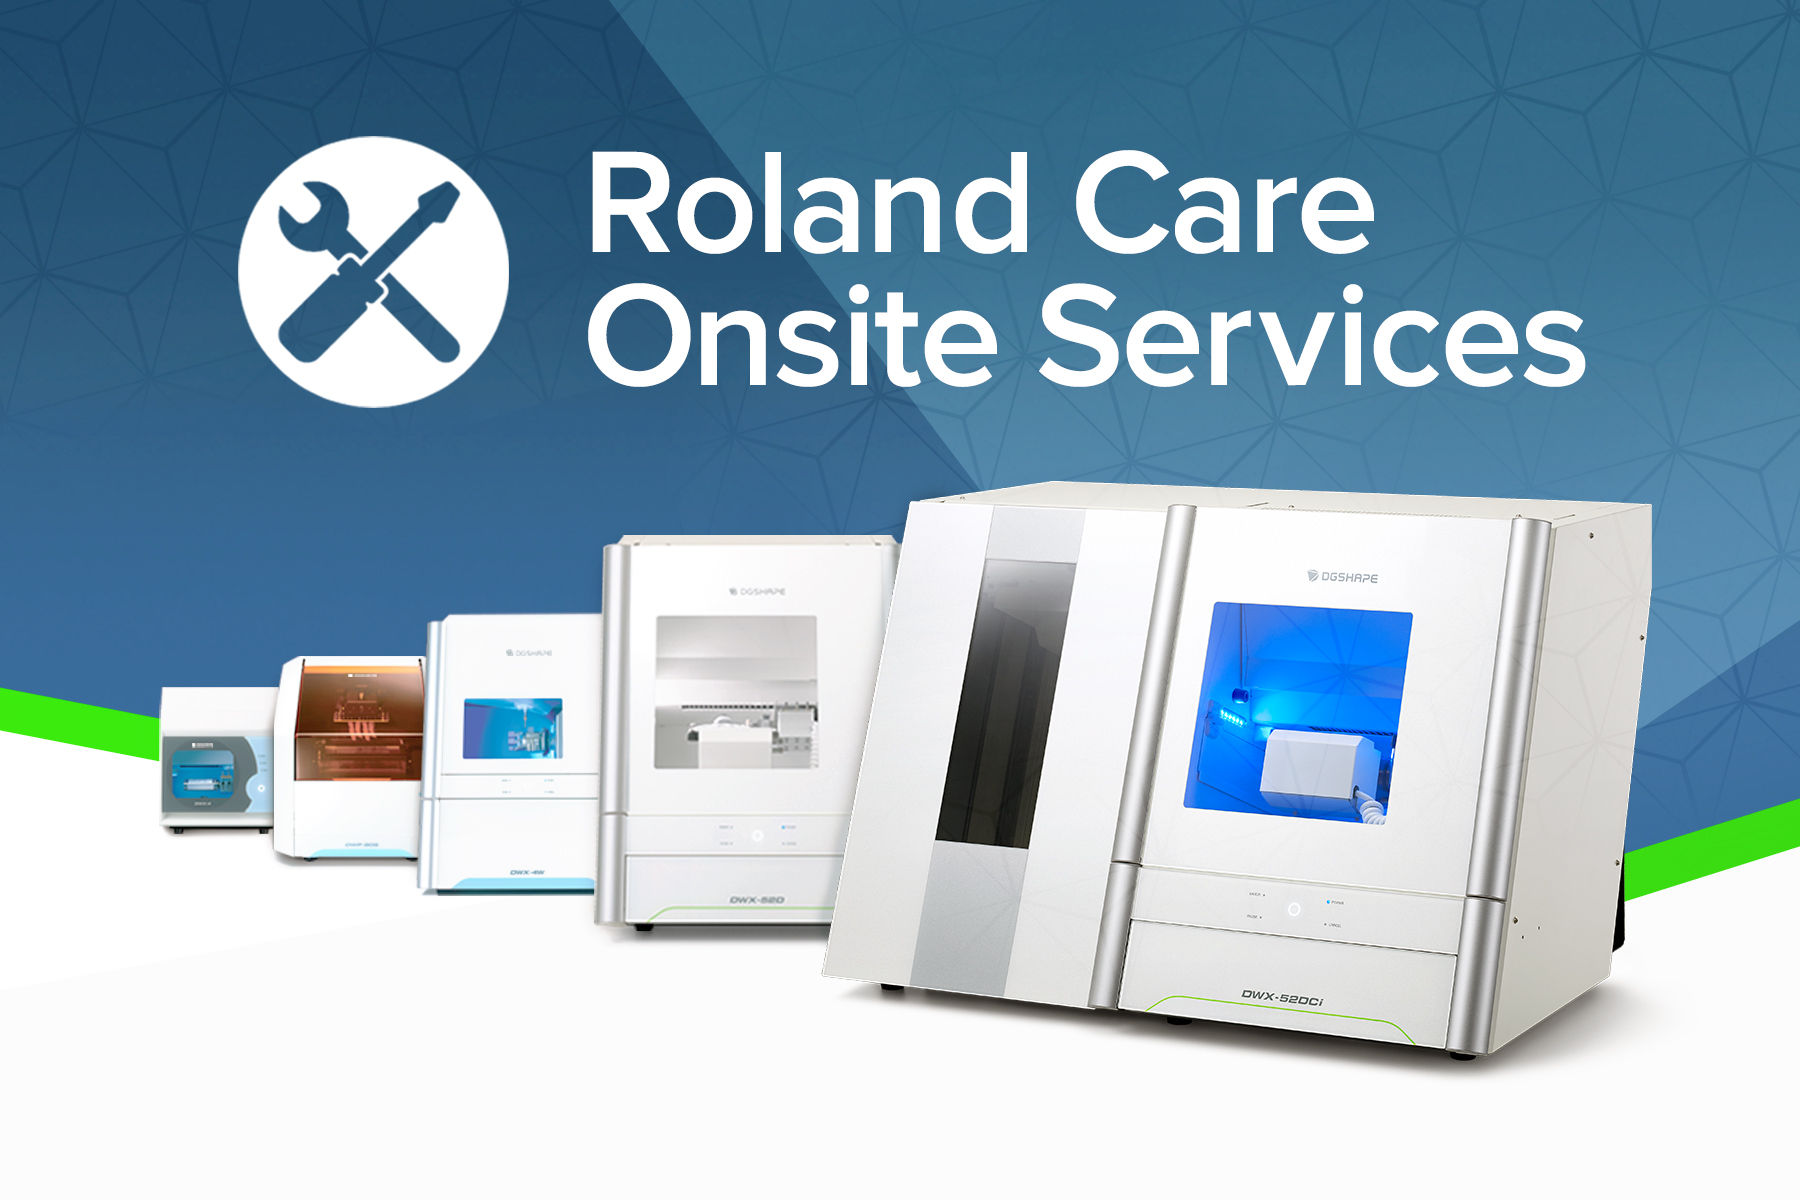 Roland DGA launches Roland Care Onsite Services for owners of Roland dental devices.